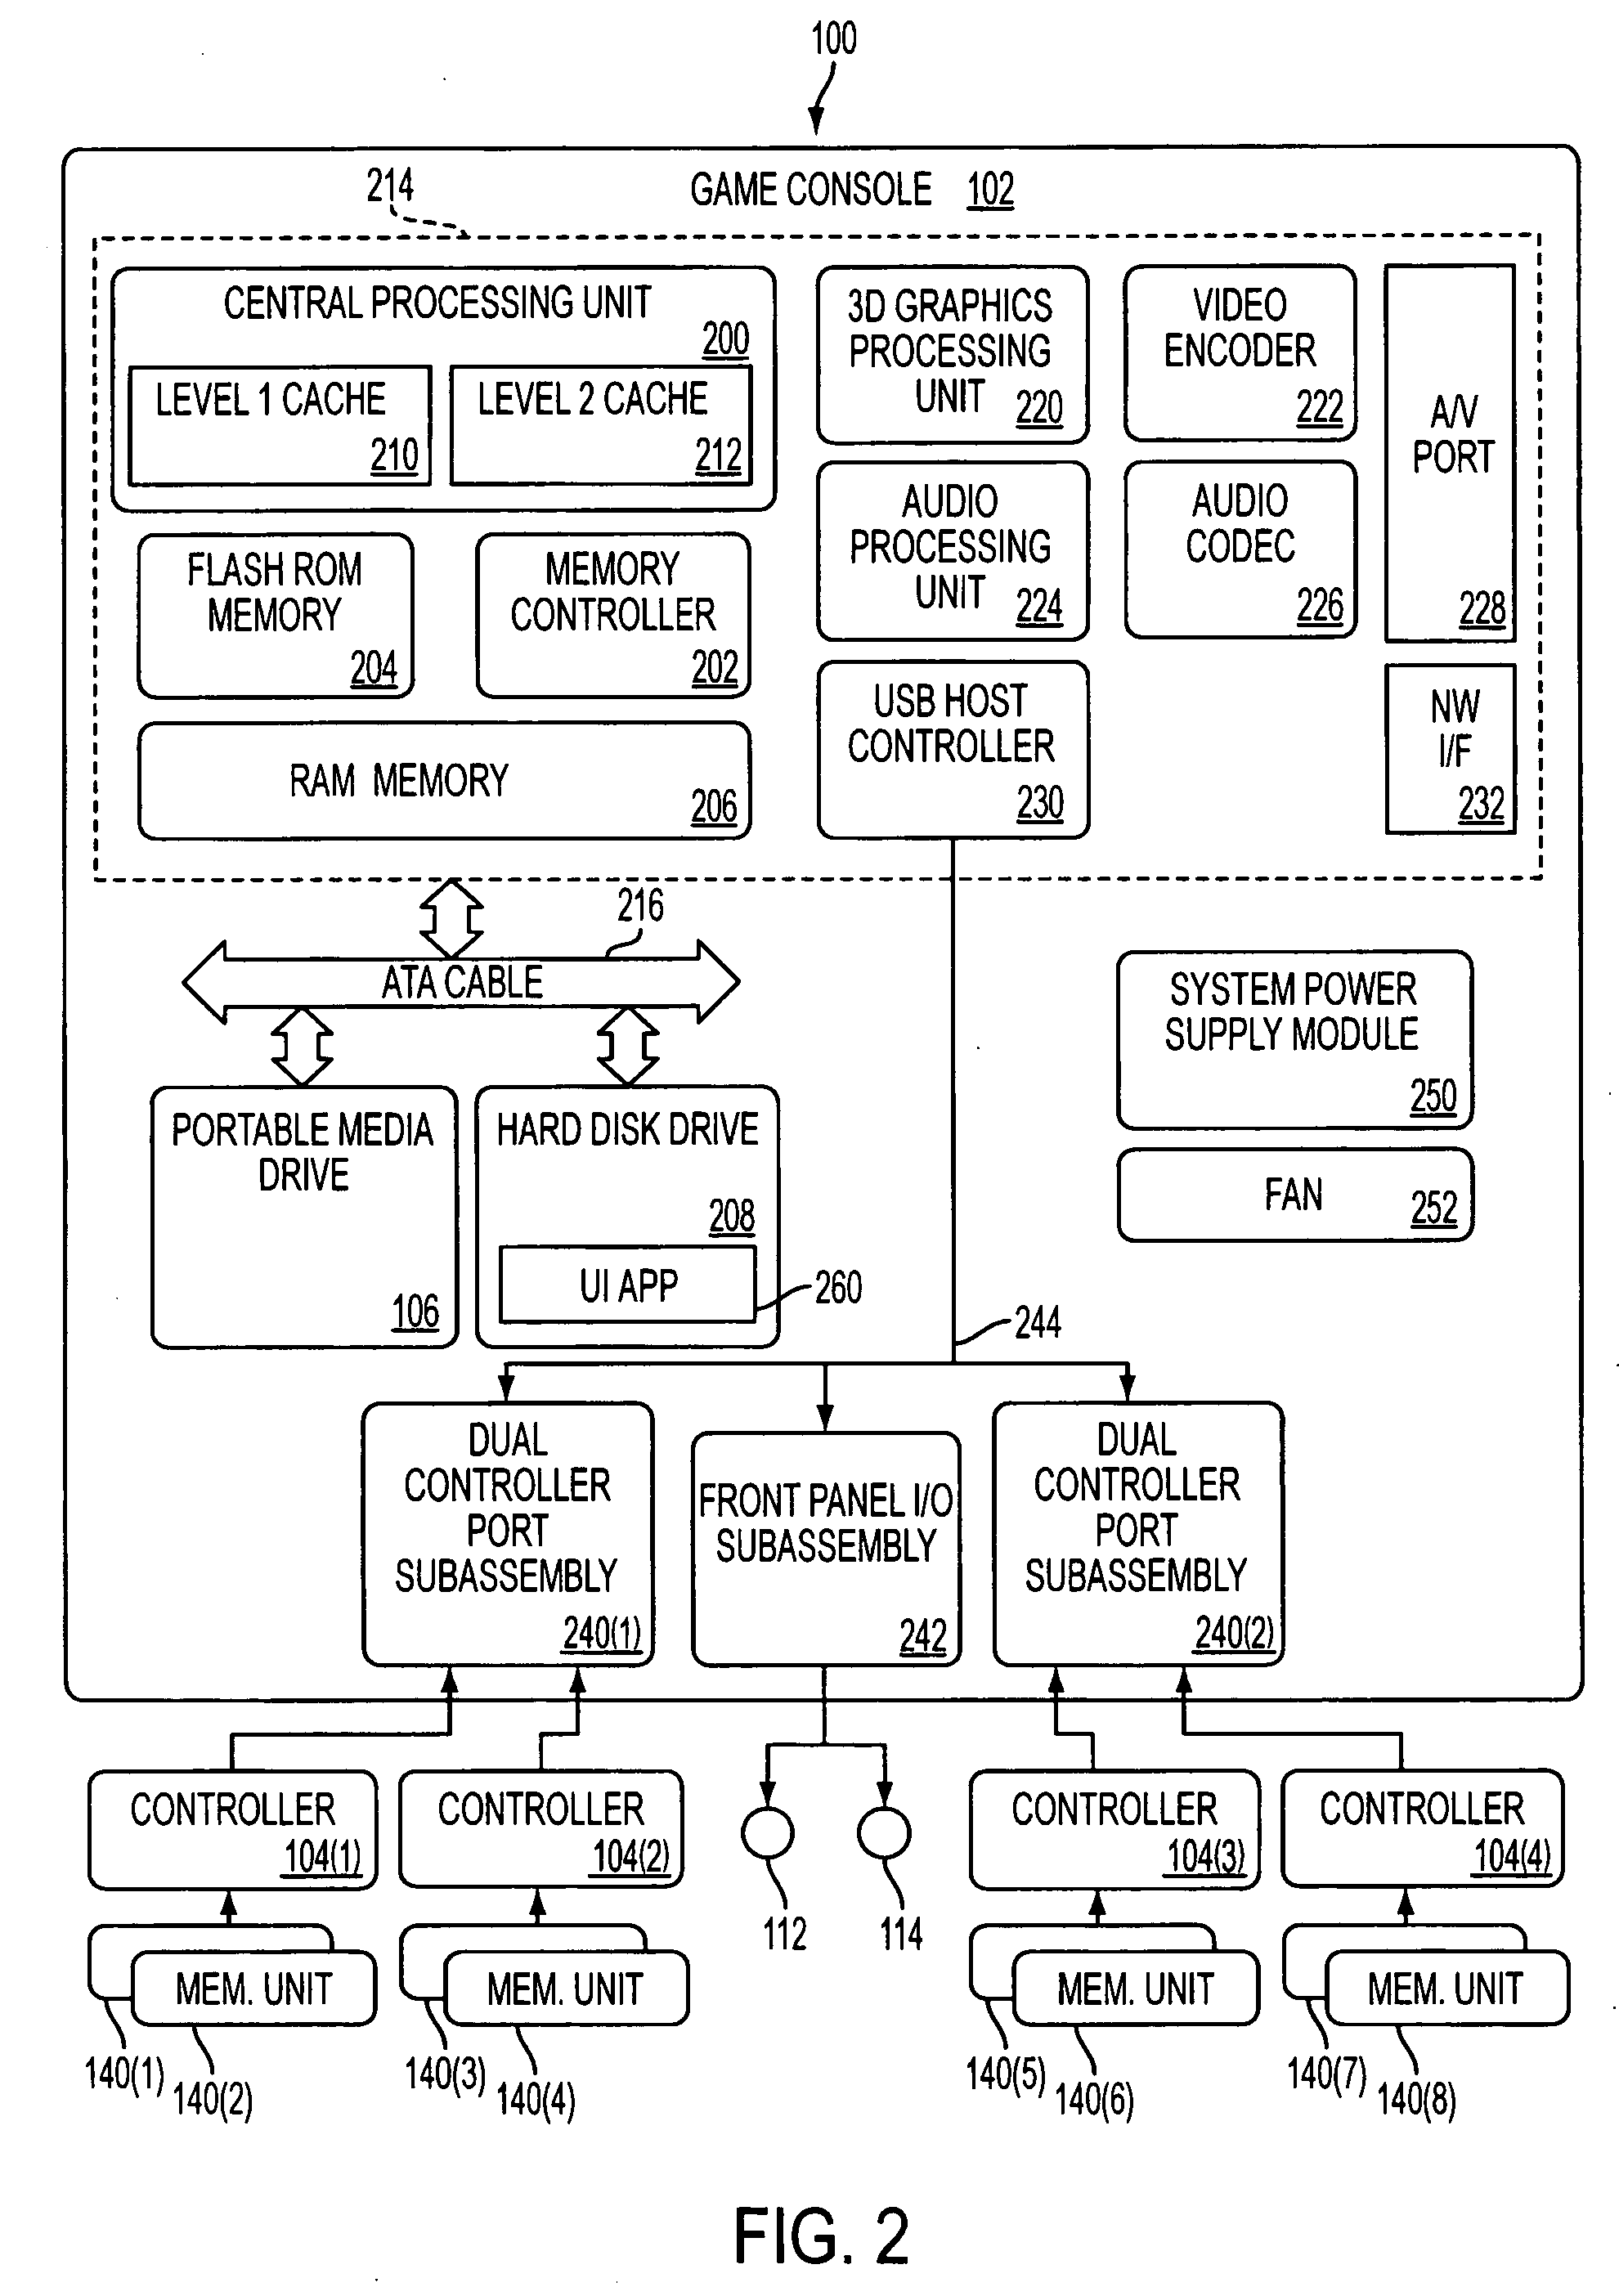 User interface for multi-sensory emoticons in a communication system